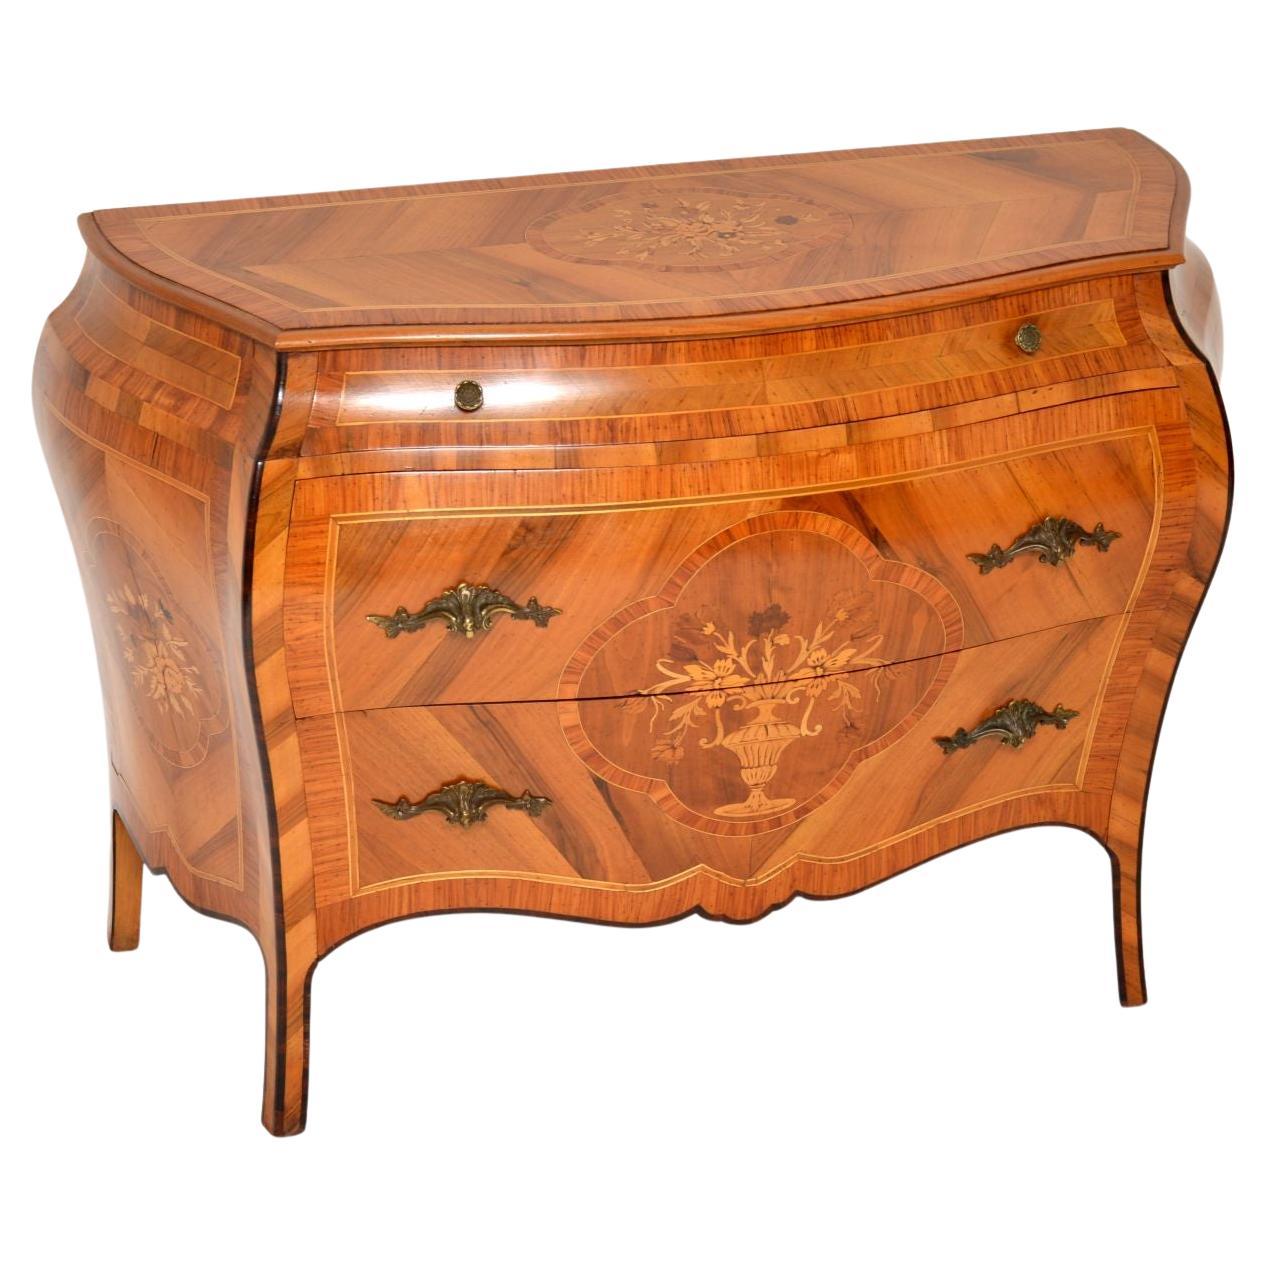 Antique Dutch Inlaid Bombe Commode in Olive Wood